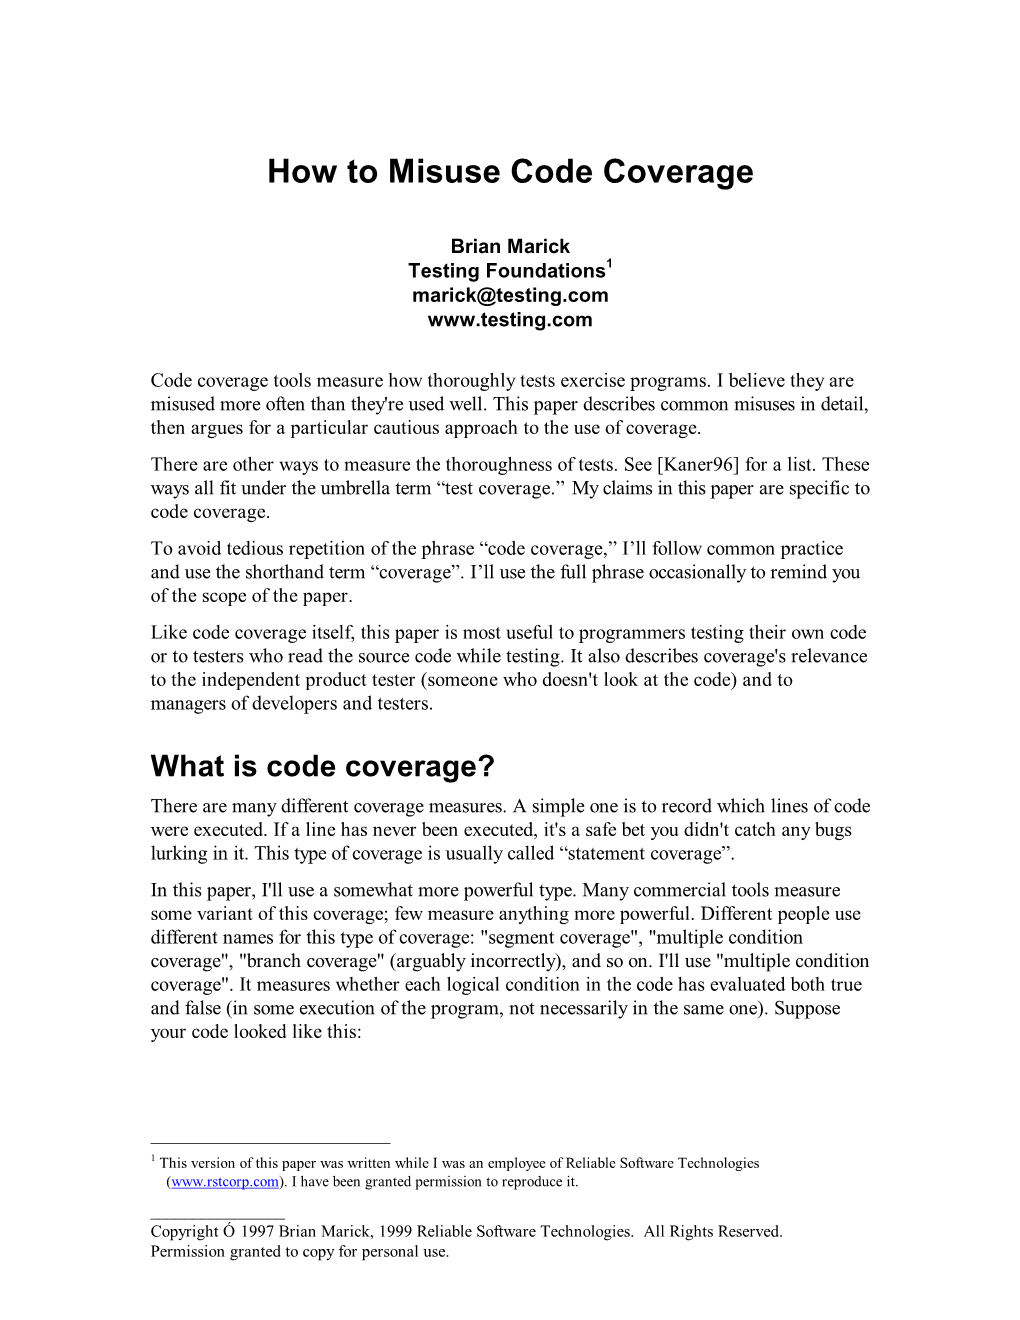 How to Misuse Code Coverage